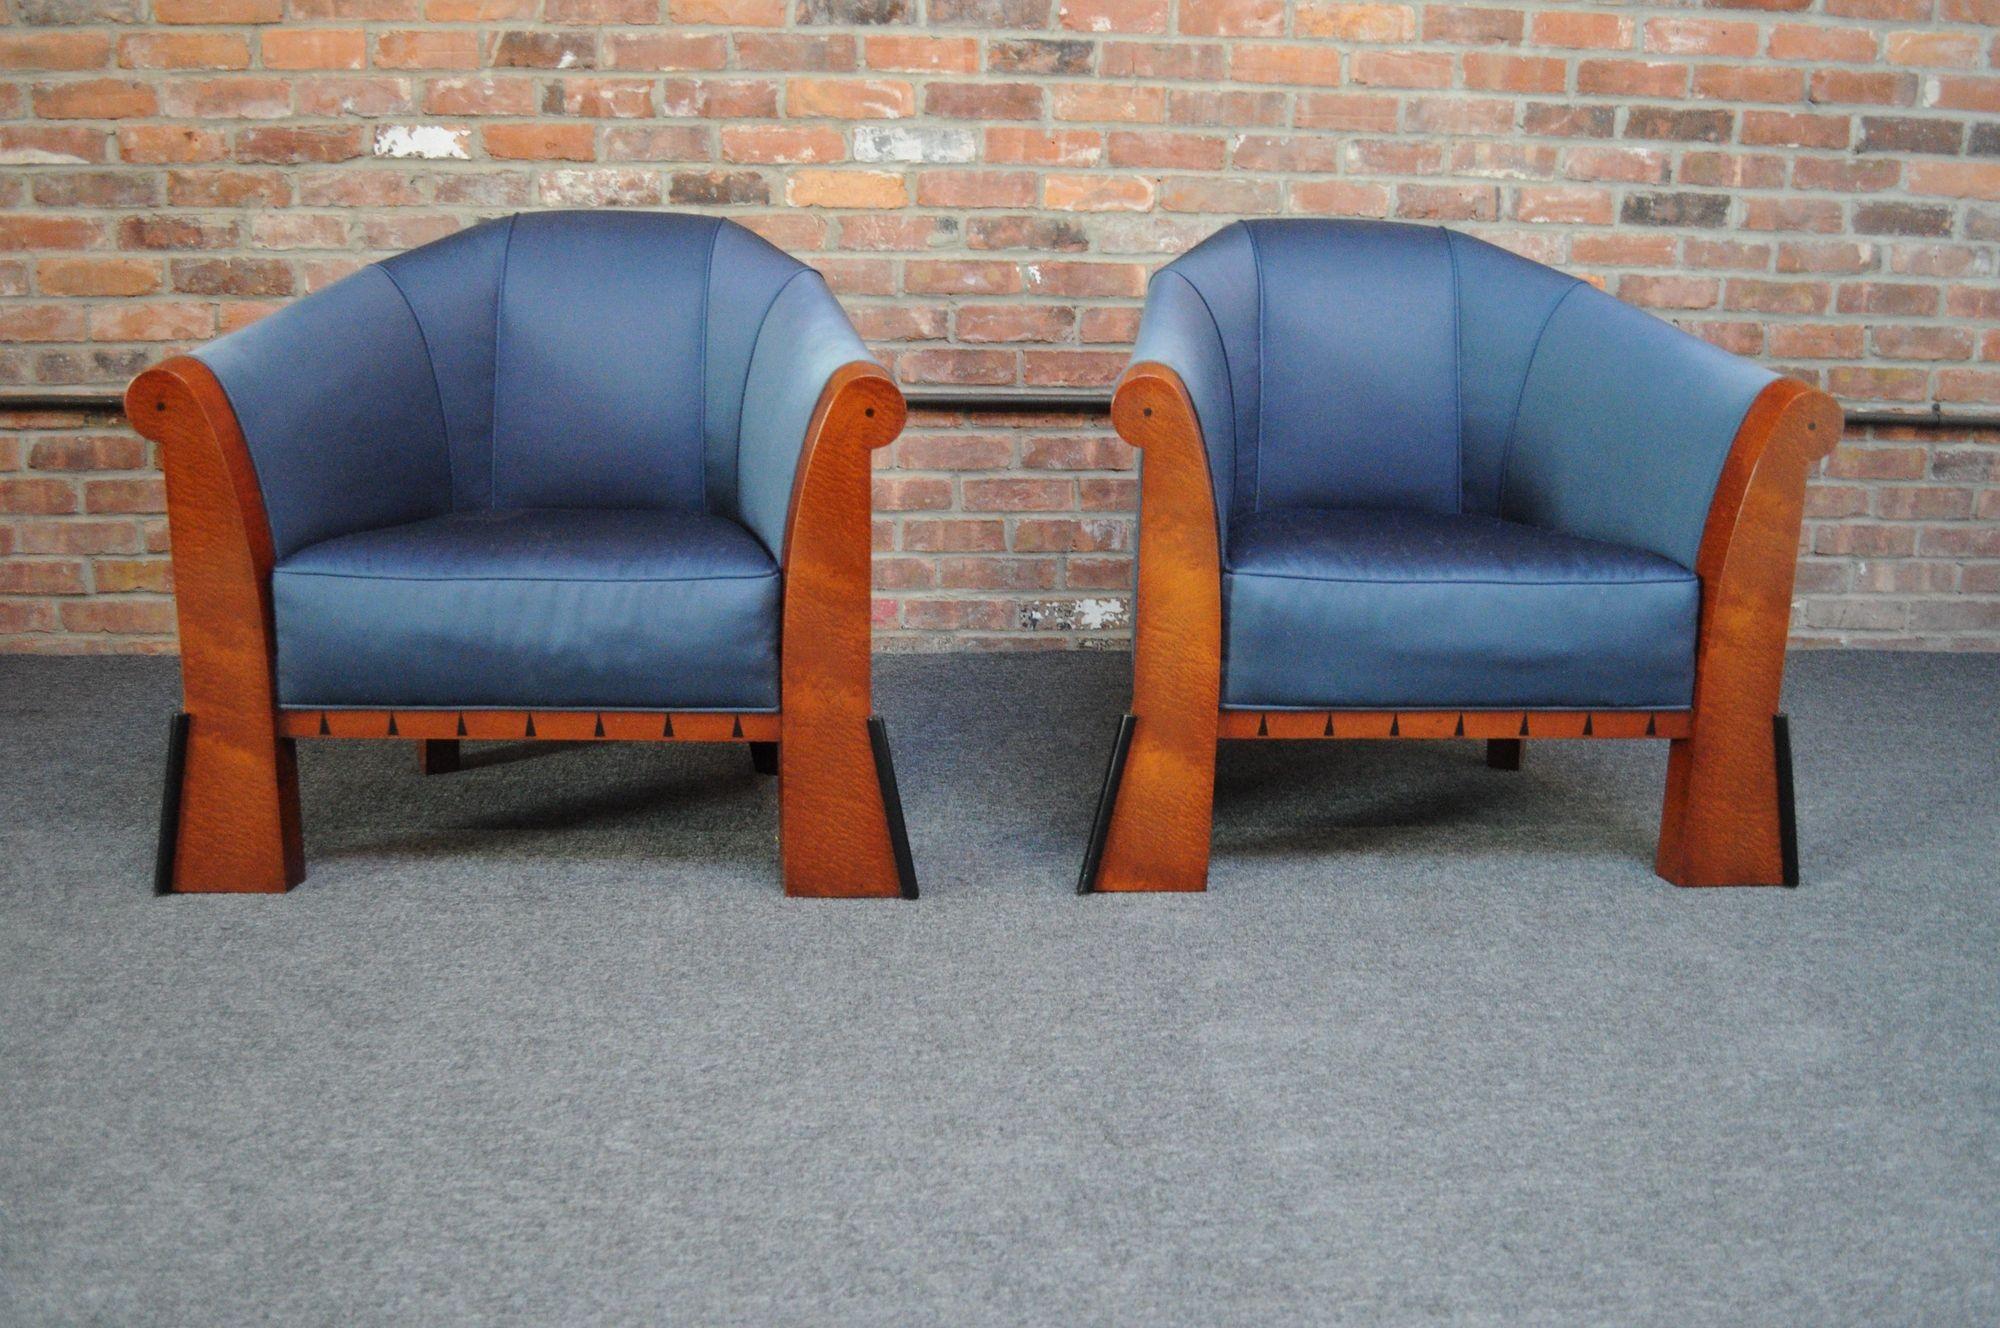 Pair of Postmodern faceted club chairs designed by Michael Graves composed of stained Birdseye Maple frames with ebony inlaid triangles and applied ebonized cylindrical decorations at the feet (ca. 1980, USA).
Scarcely seen pieces by the noted